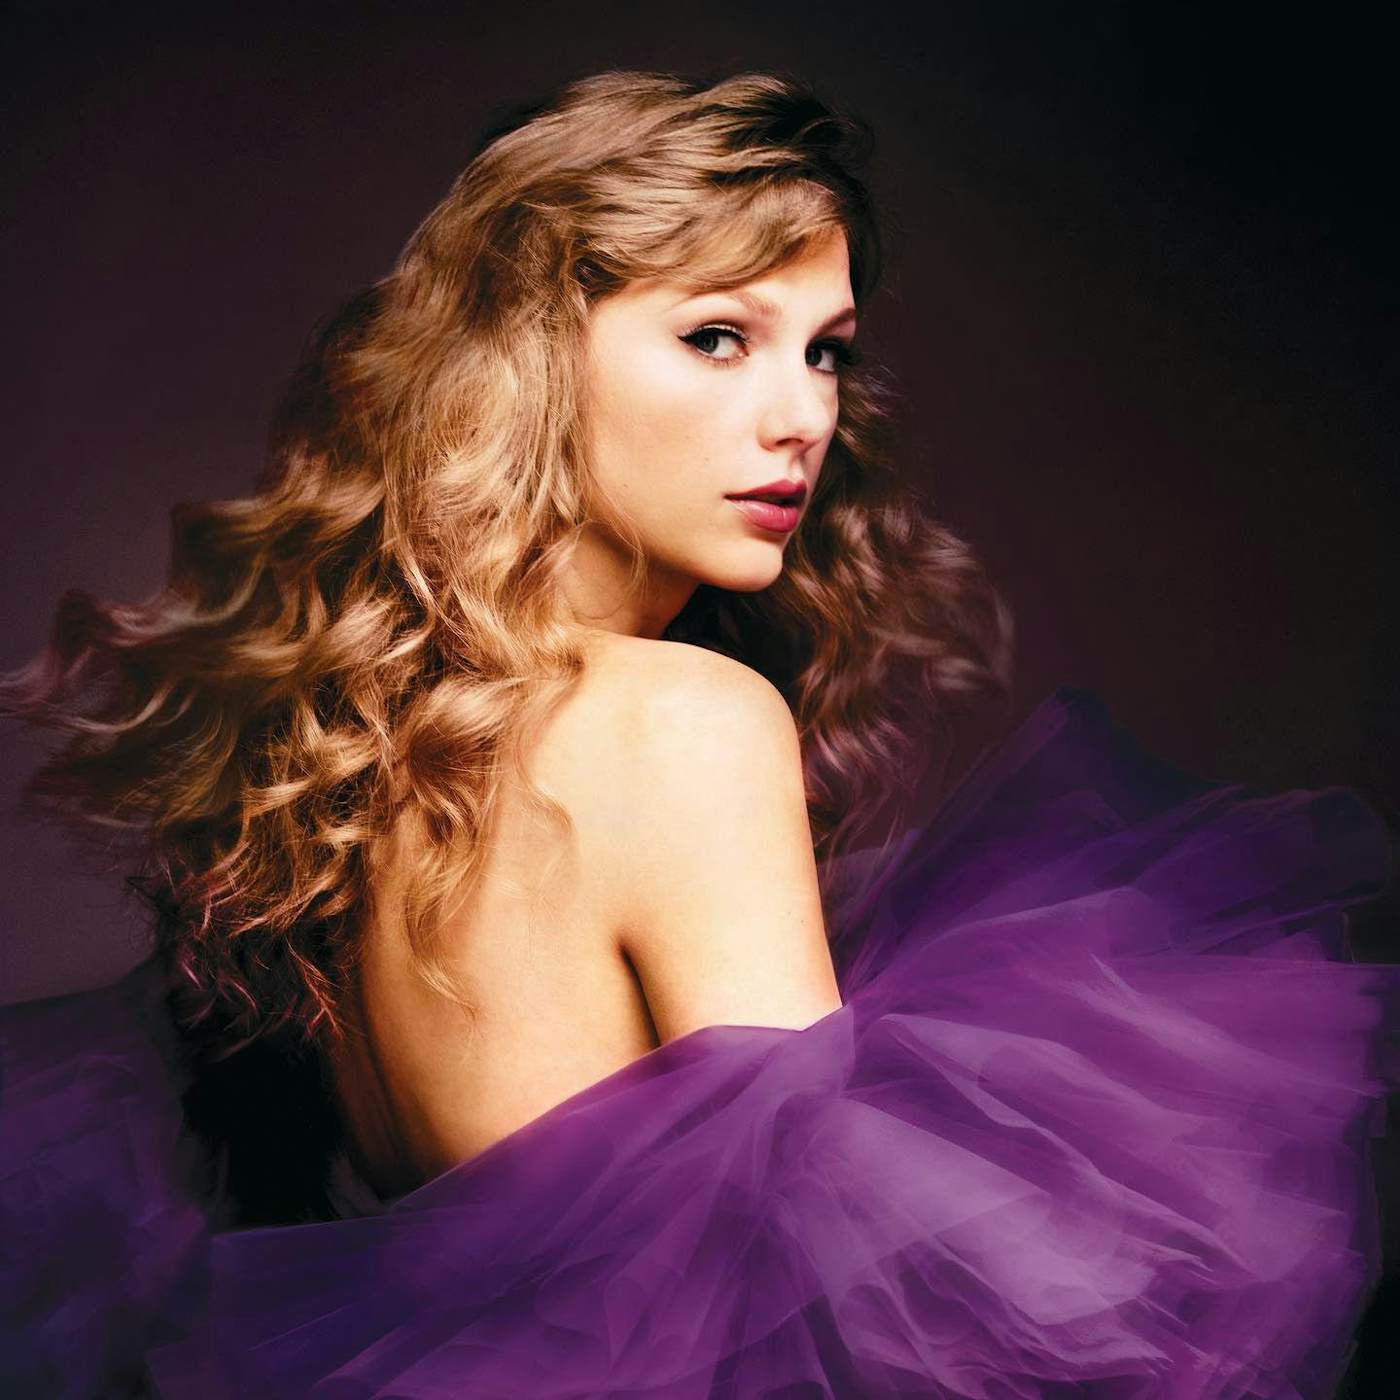 Speaking About Speak Now (Taylor's Version) – The Classic Critic